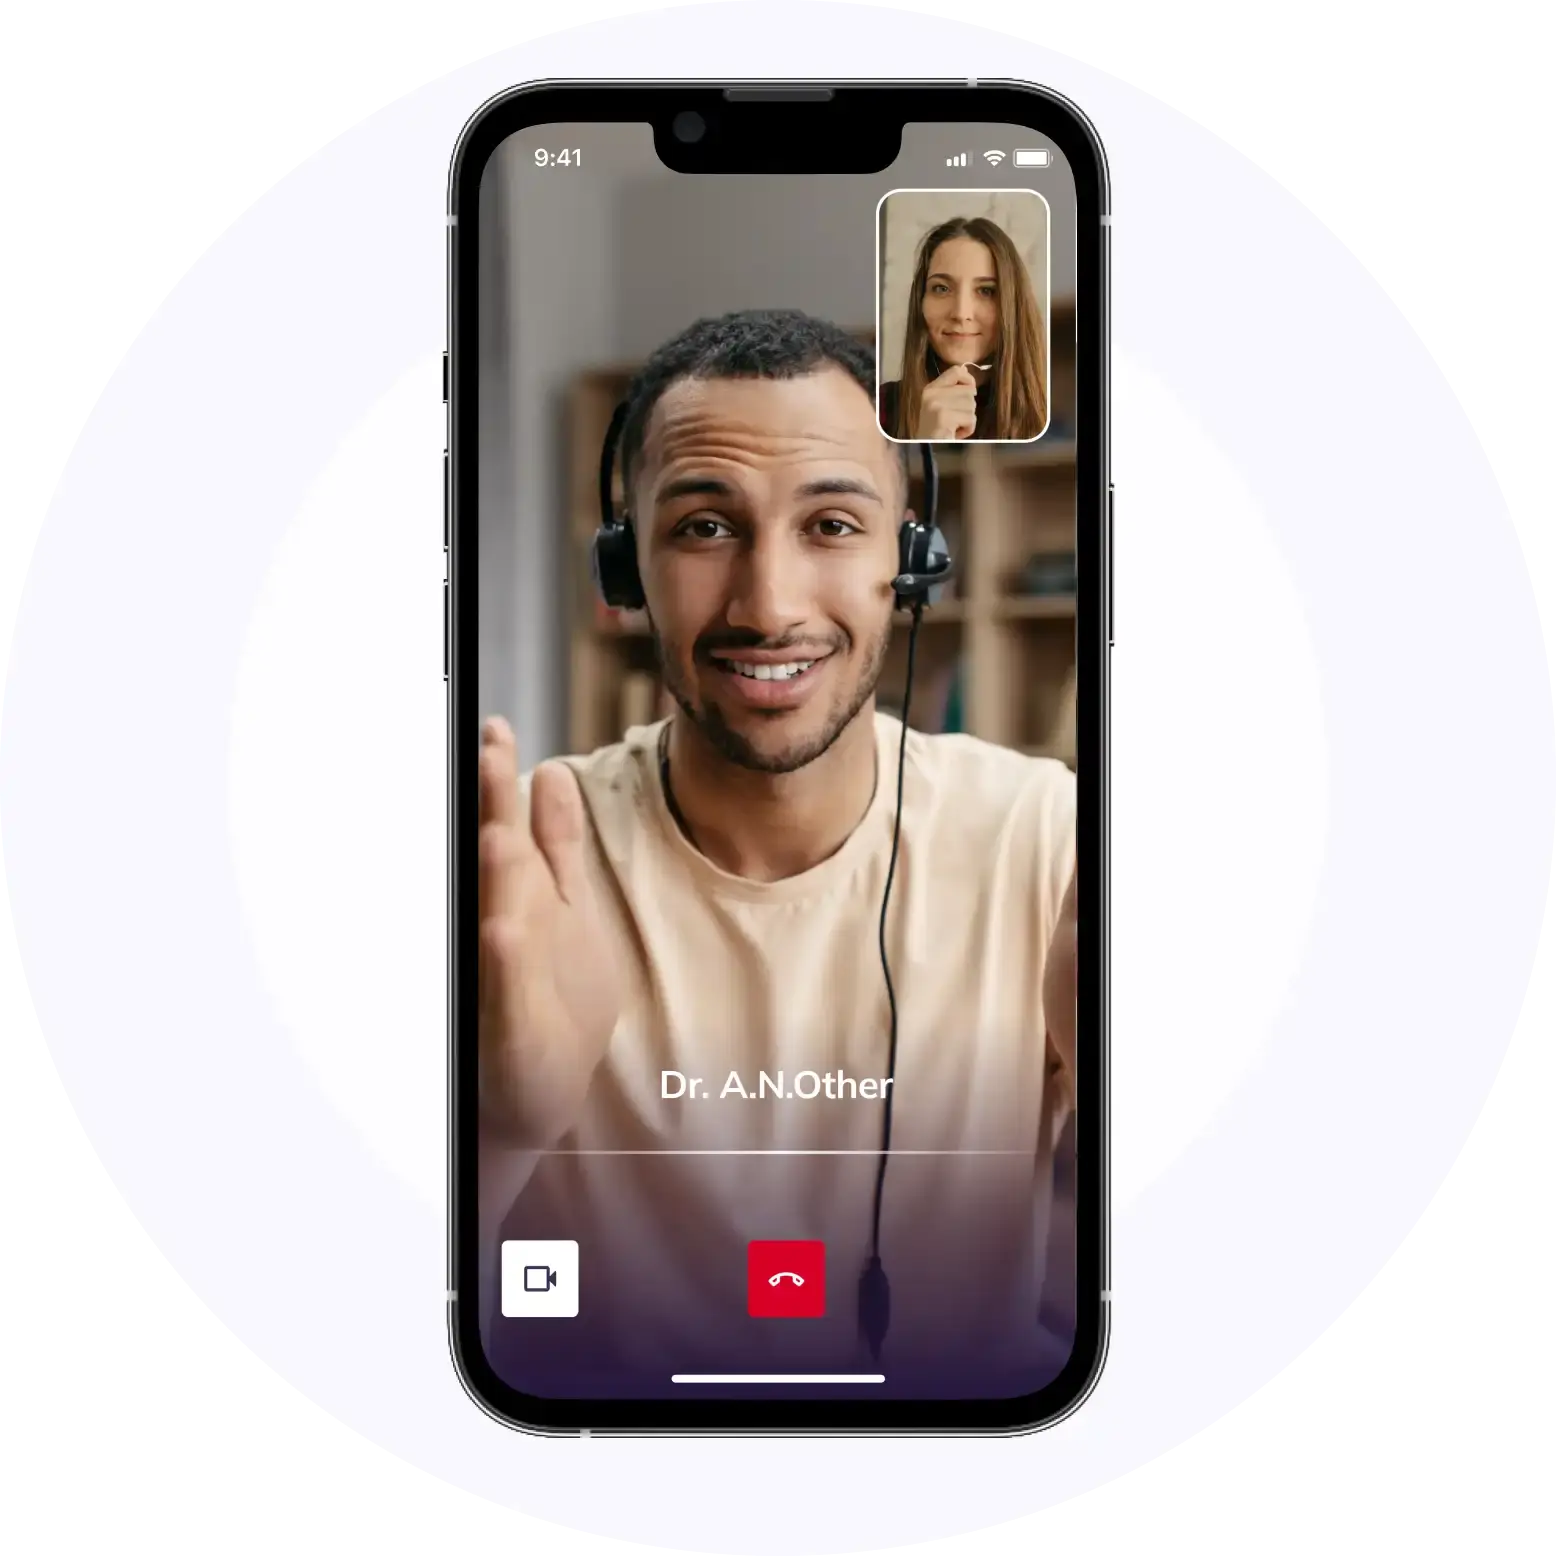 A man and woman in a video call on an iphone.